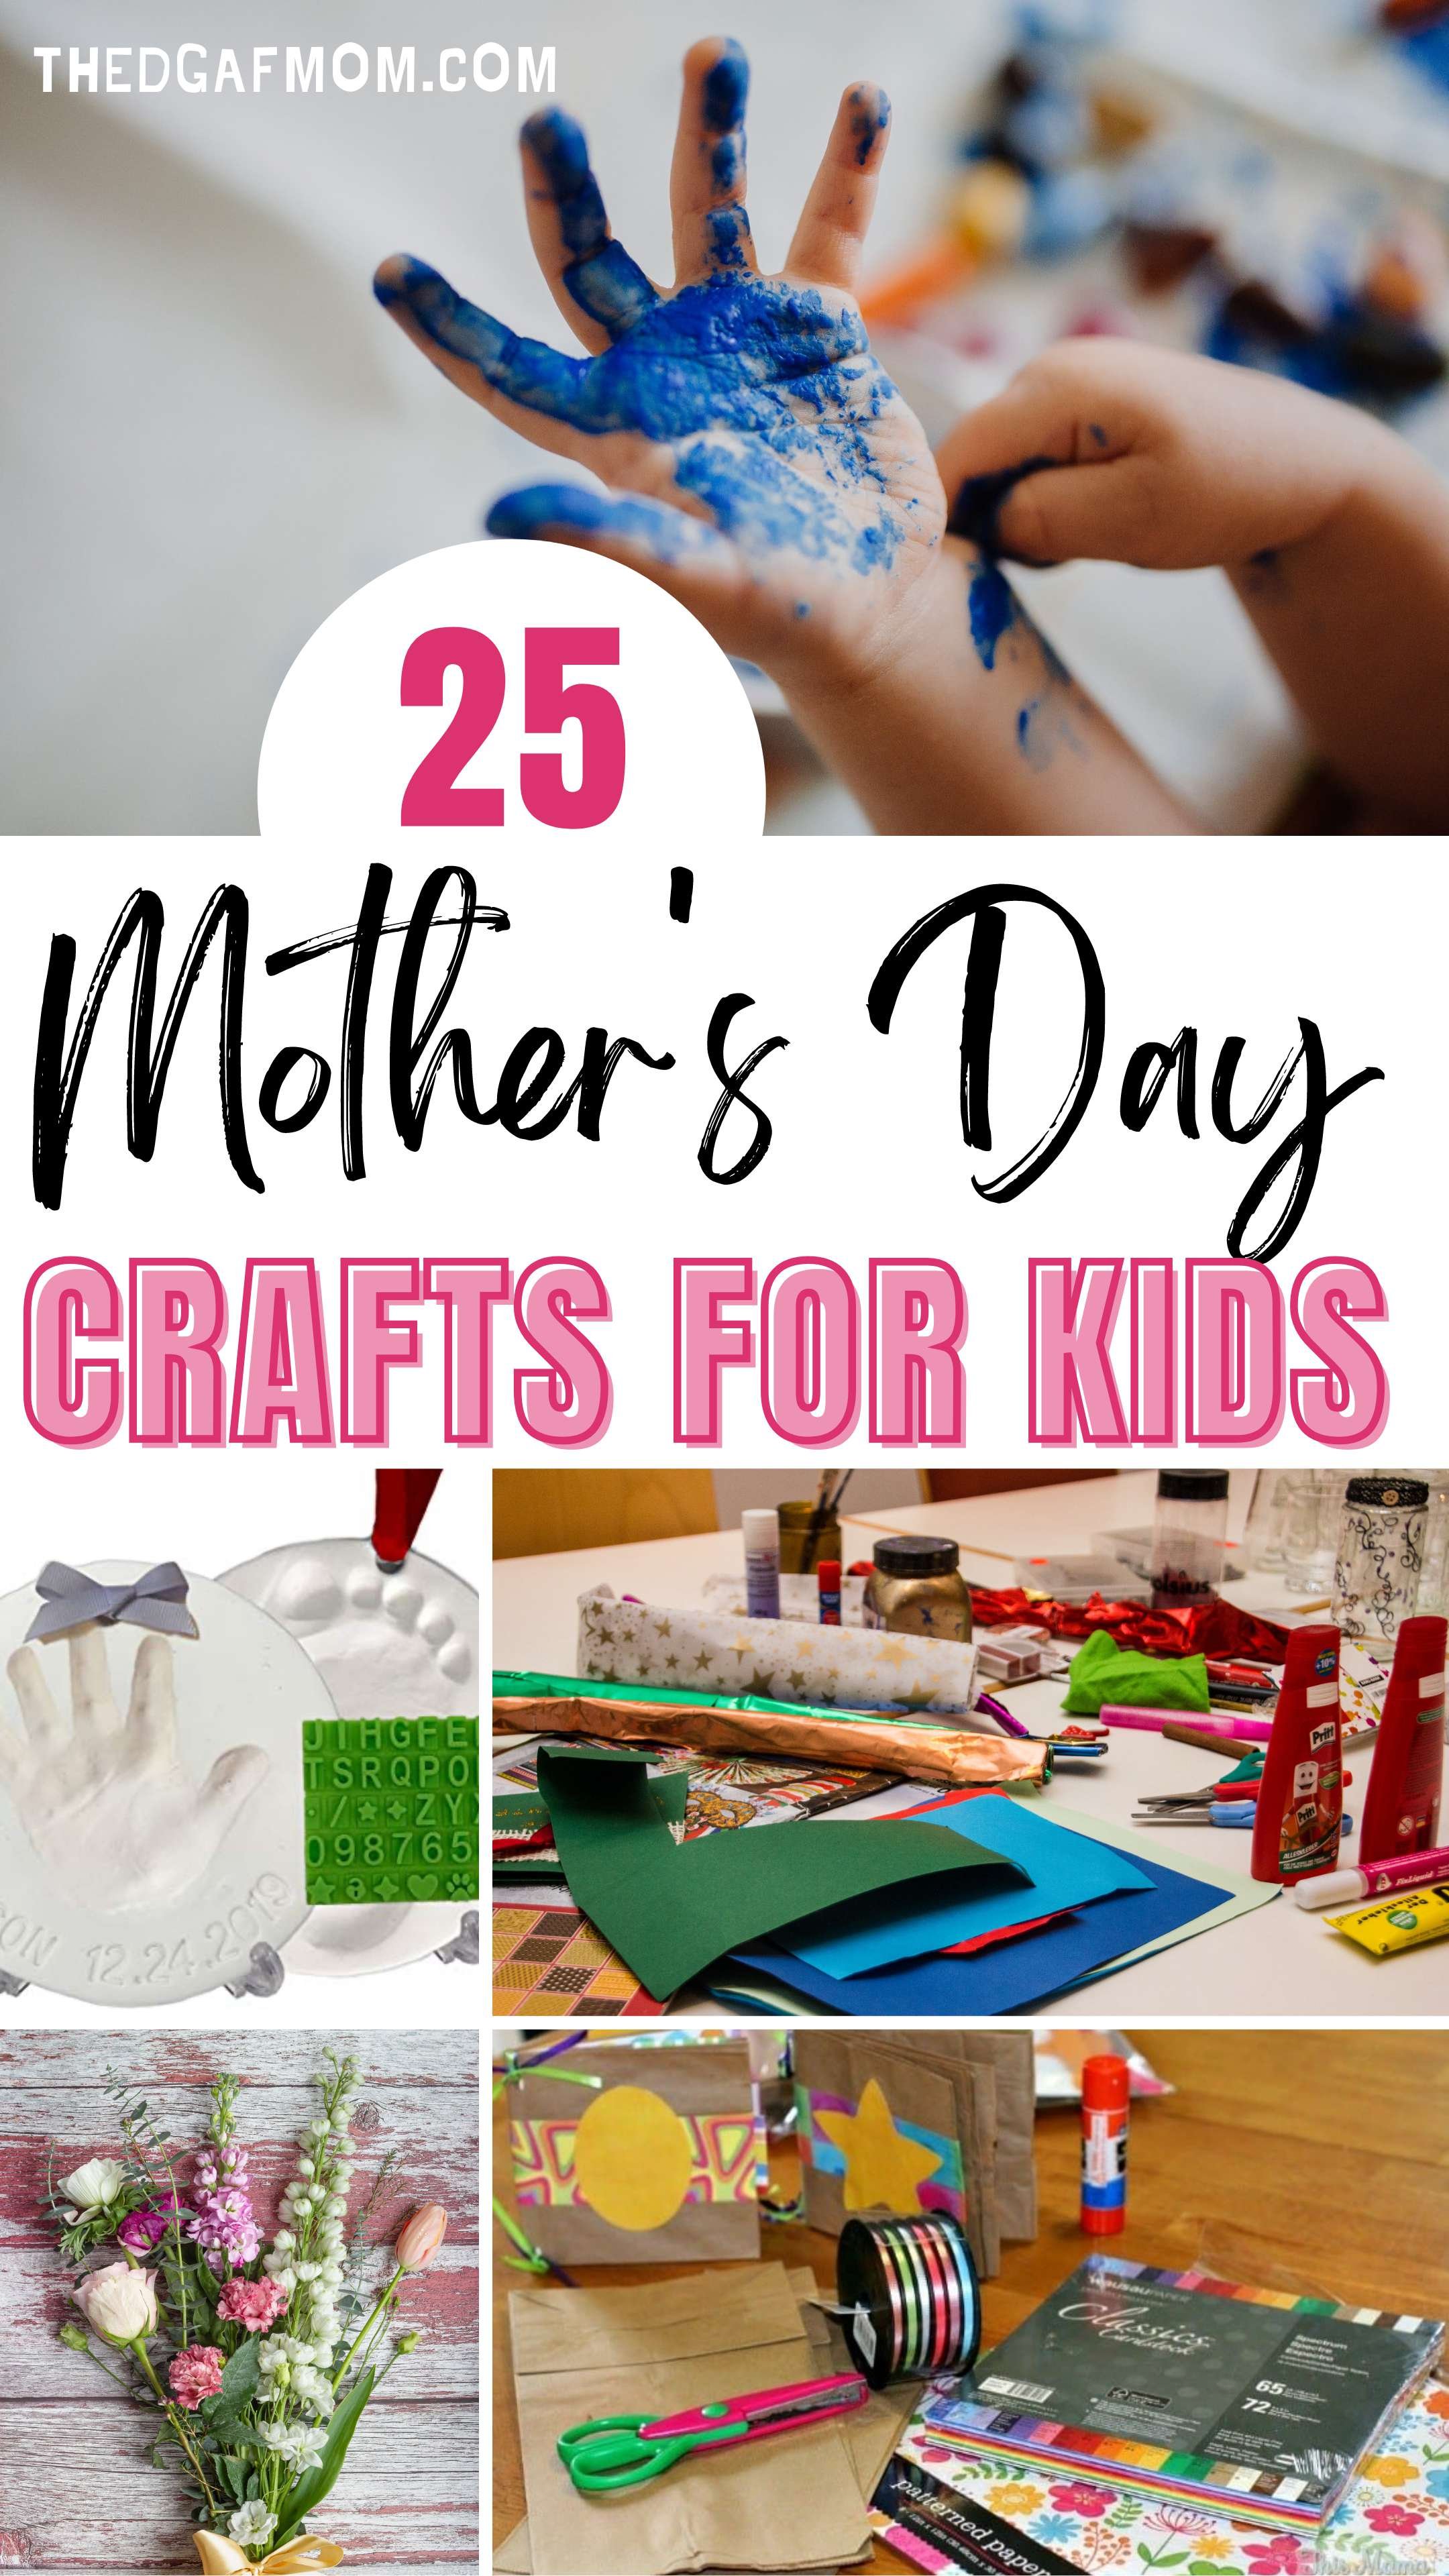 Looking for a way to show mom some love this year? Check out these 25+ fun and easy Mother's Day crafts that kids of all ages will enjoy making. From personalized gifts to heartfelt keepsakes, we've got you covered!